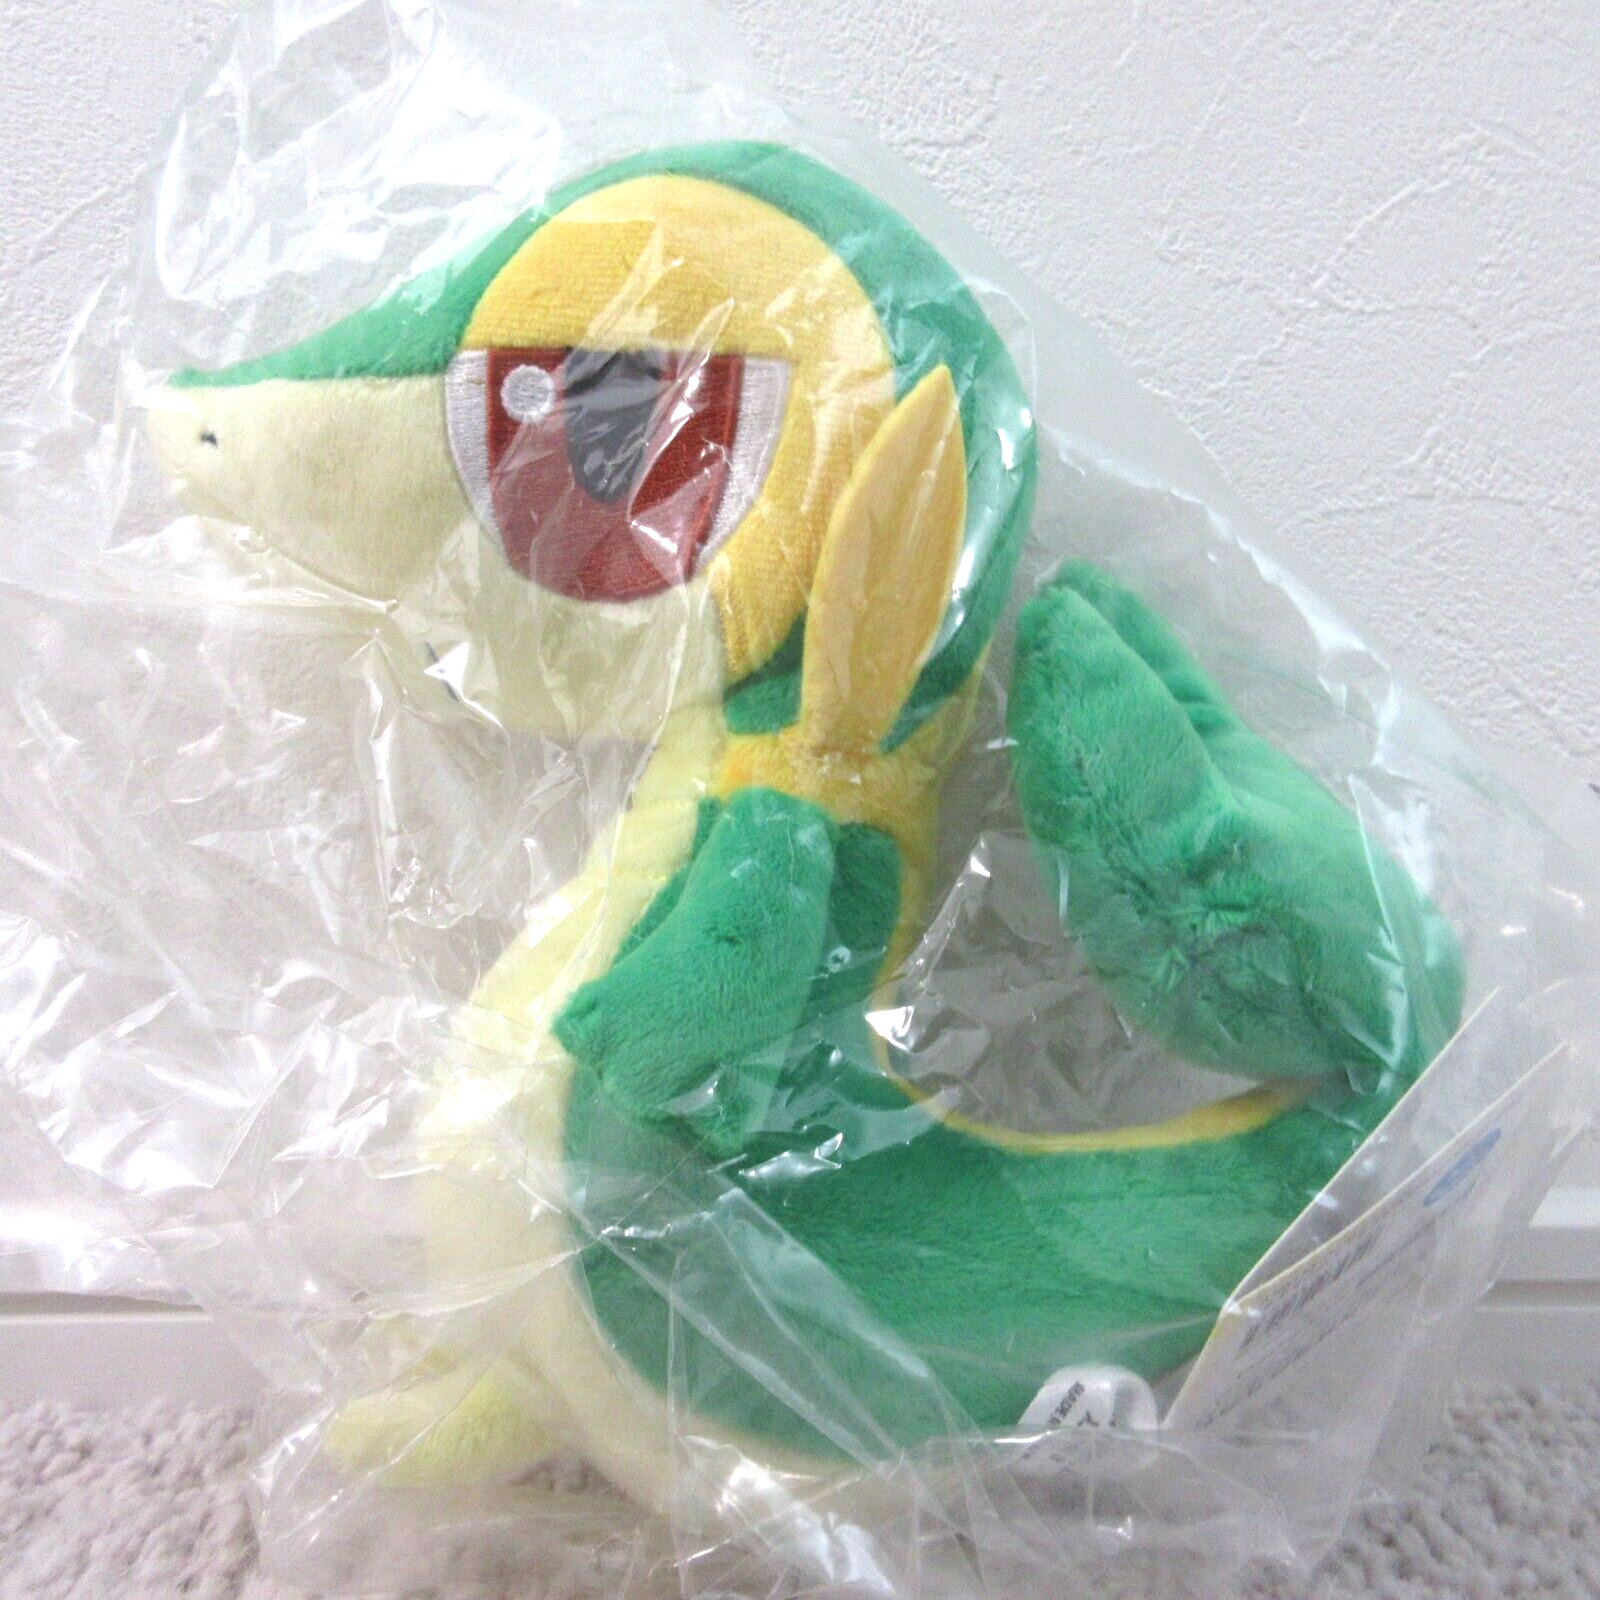 [US STOCK] Sanei Pokemon All Star Collection Plush PP238 Snivy S Size Stuffed